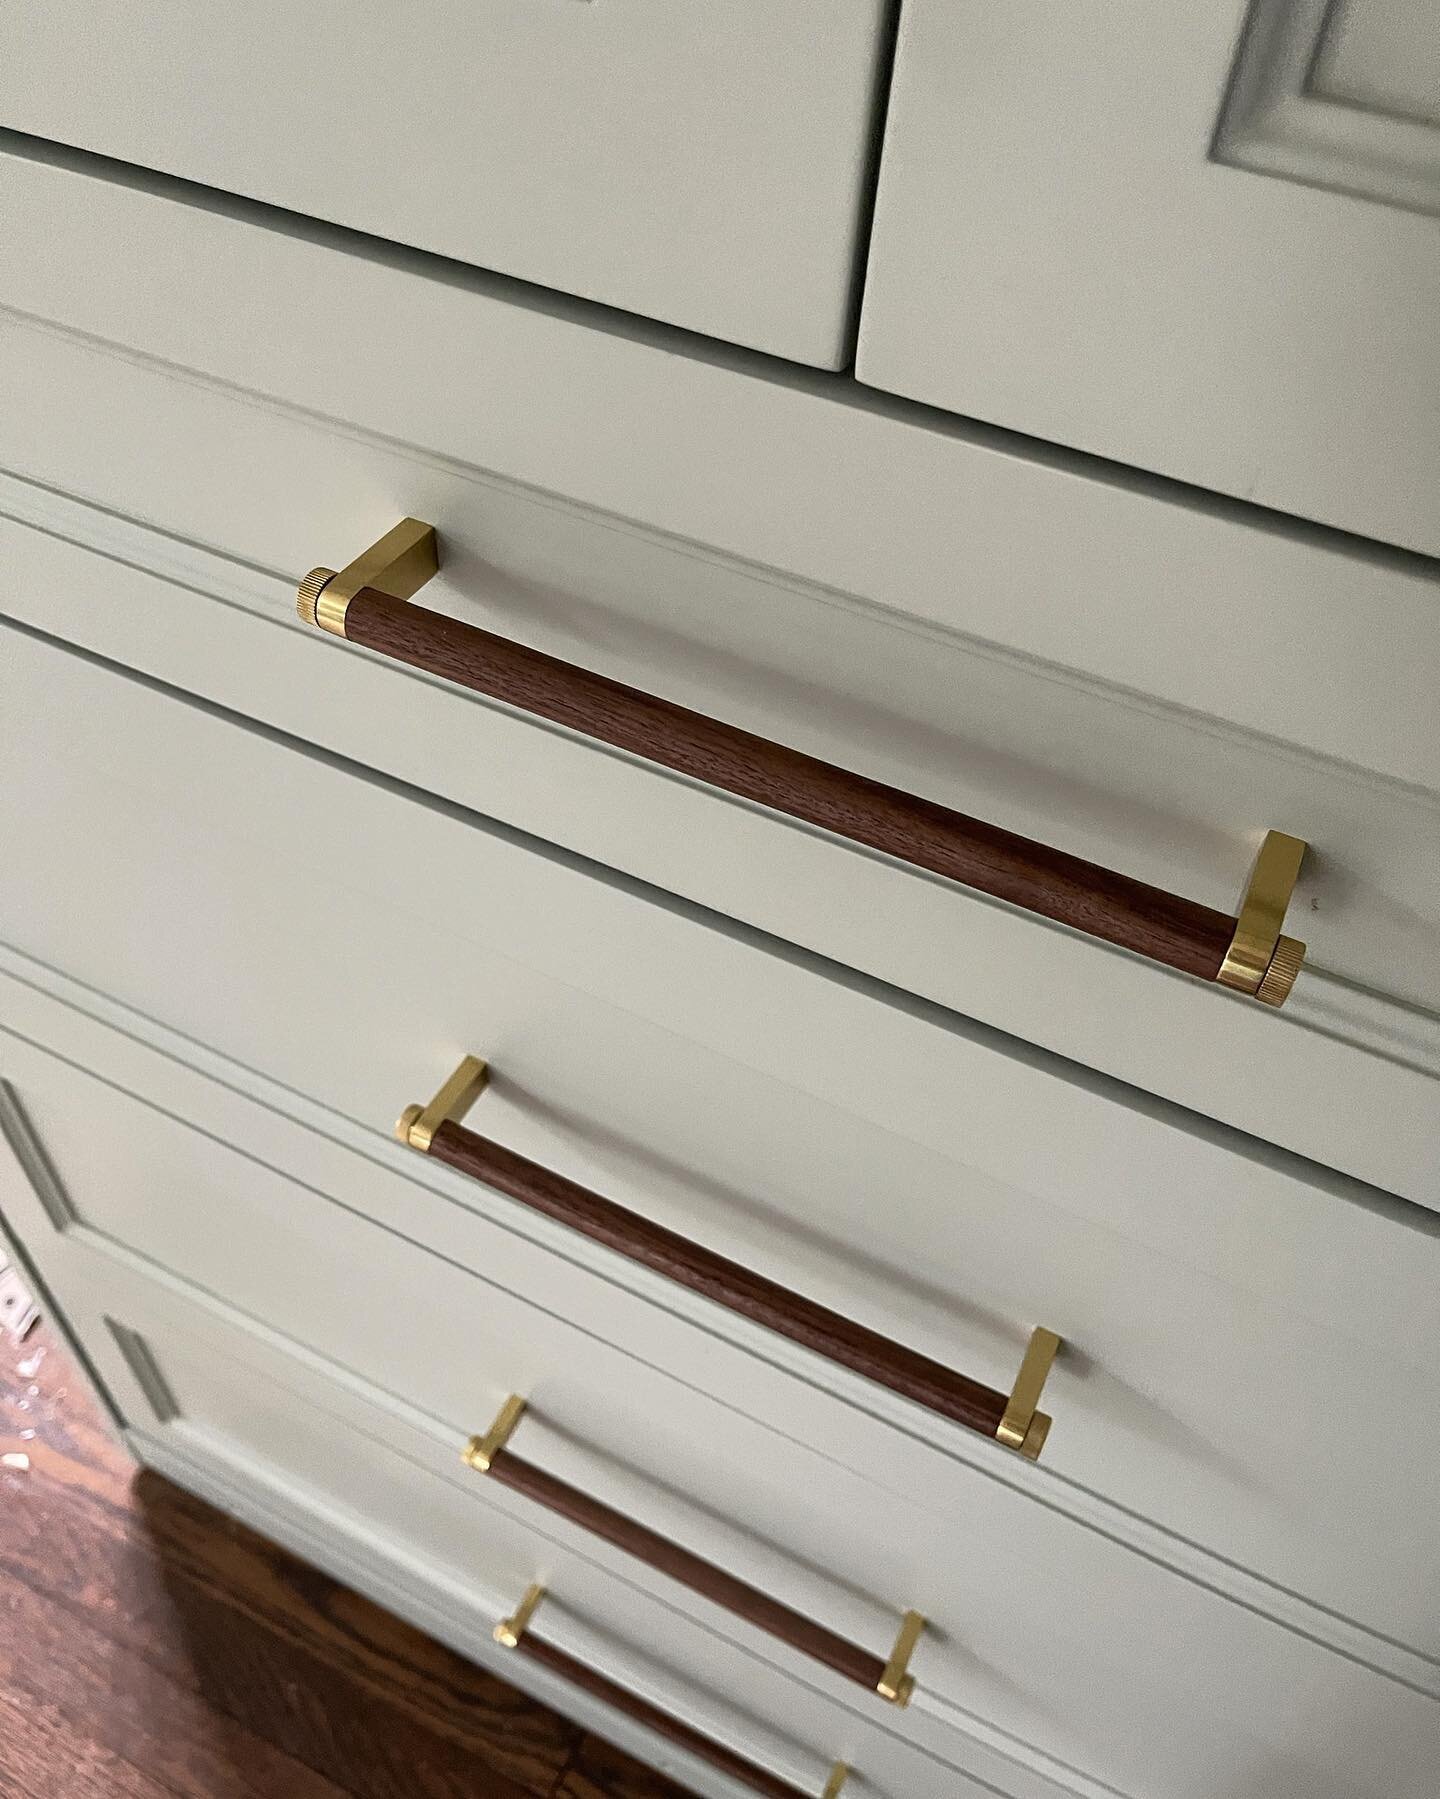 This client&rsquo;s dressing room is really taking shape! We just installed these brass and walnut pulls, which add warmth and texture to the space.
.
Stay tuned for more!
.
.
.
.
.
.
.
.
.
.
.
.
.
.
.
.
.
.
.
.
.
.
.
.
.

@uptownmontclairnj 
#montcl